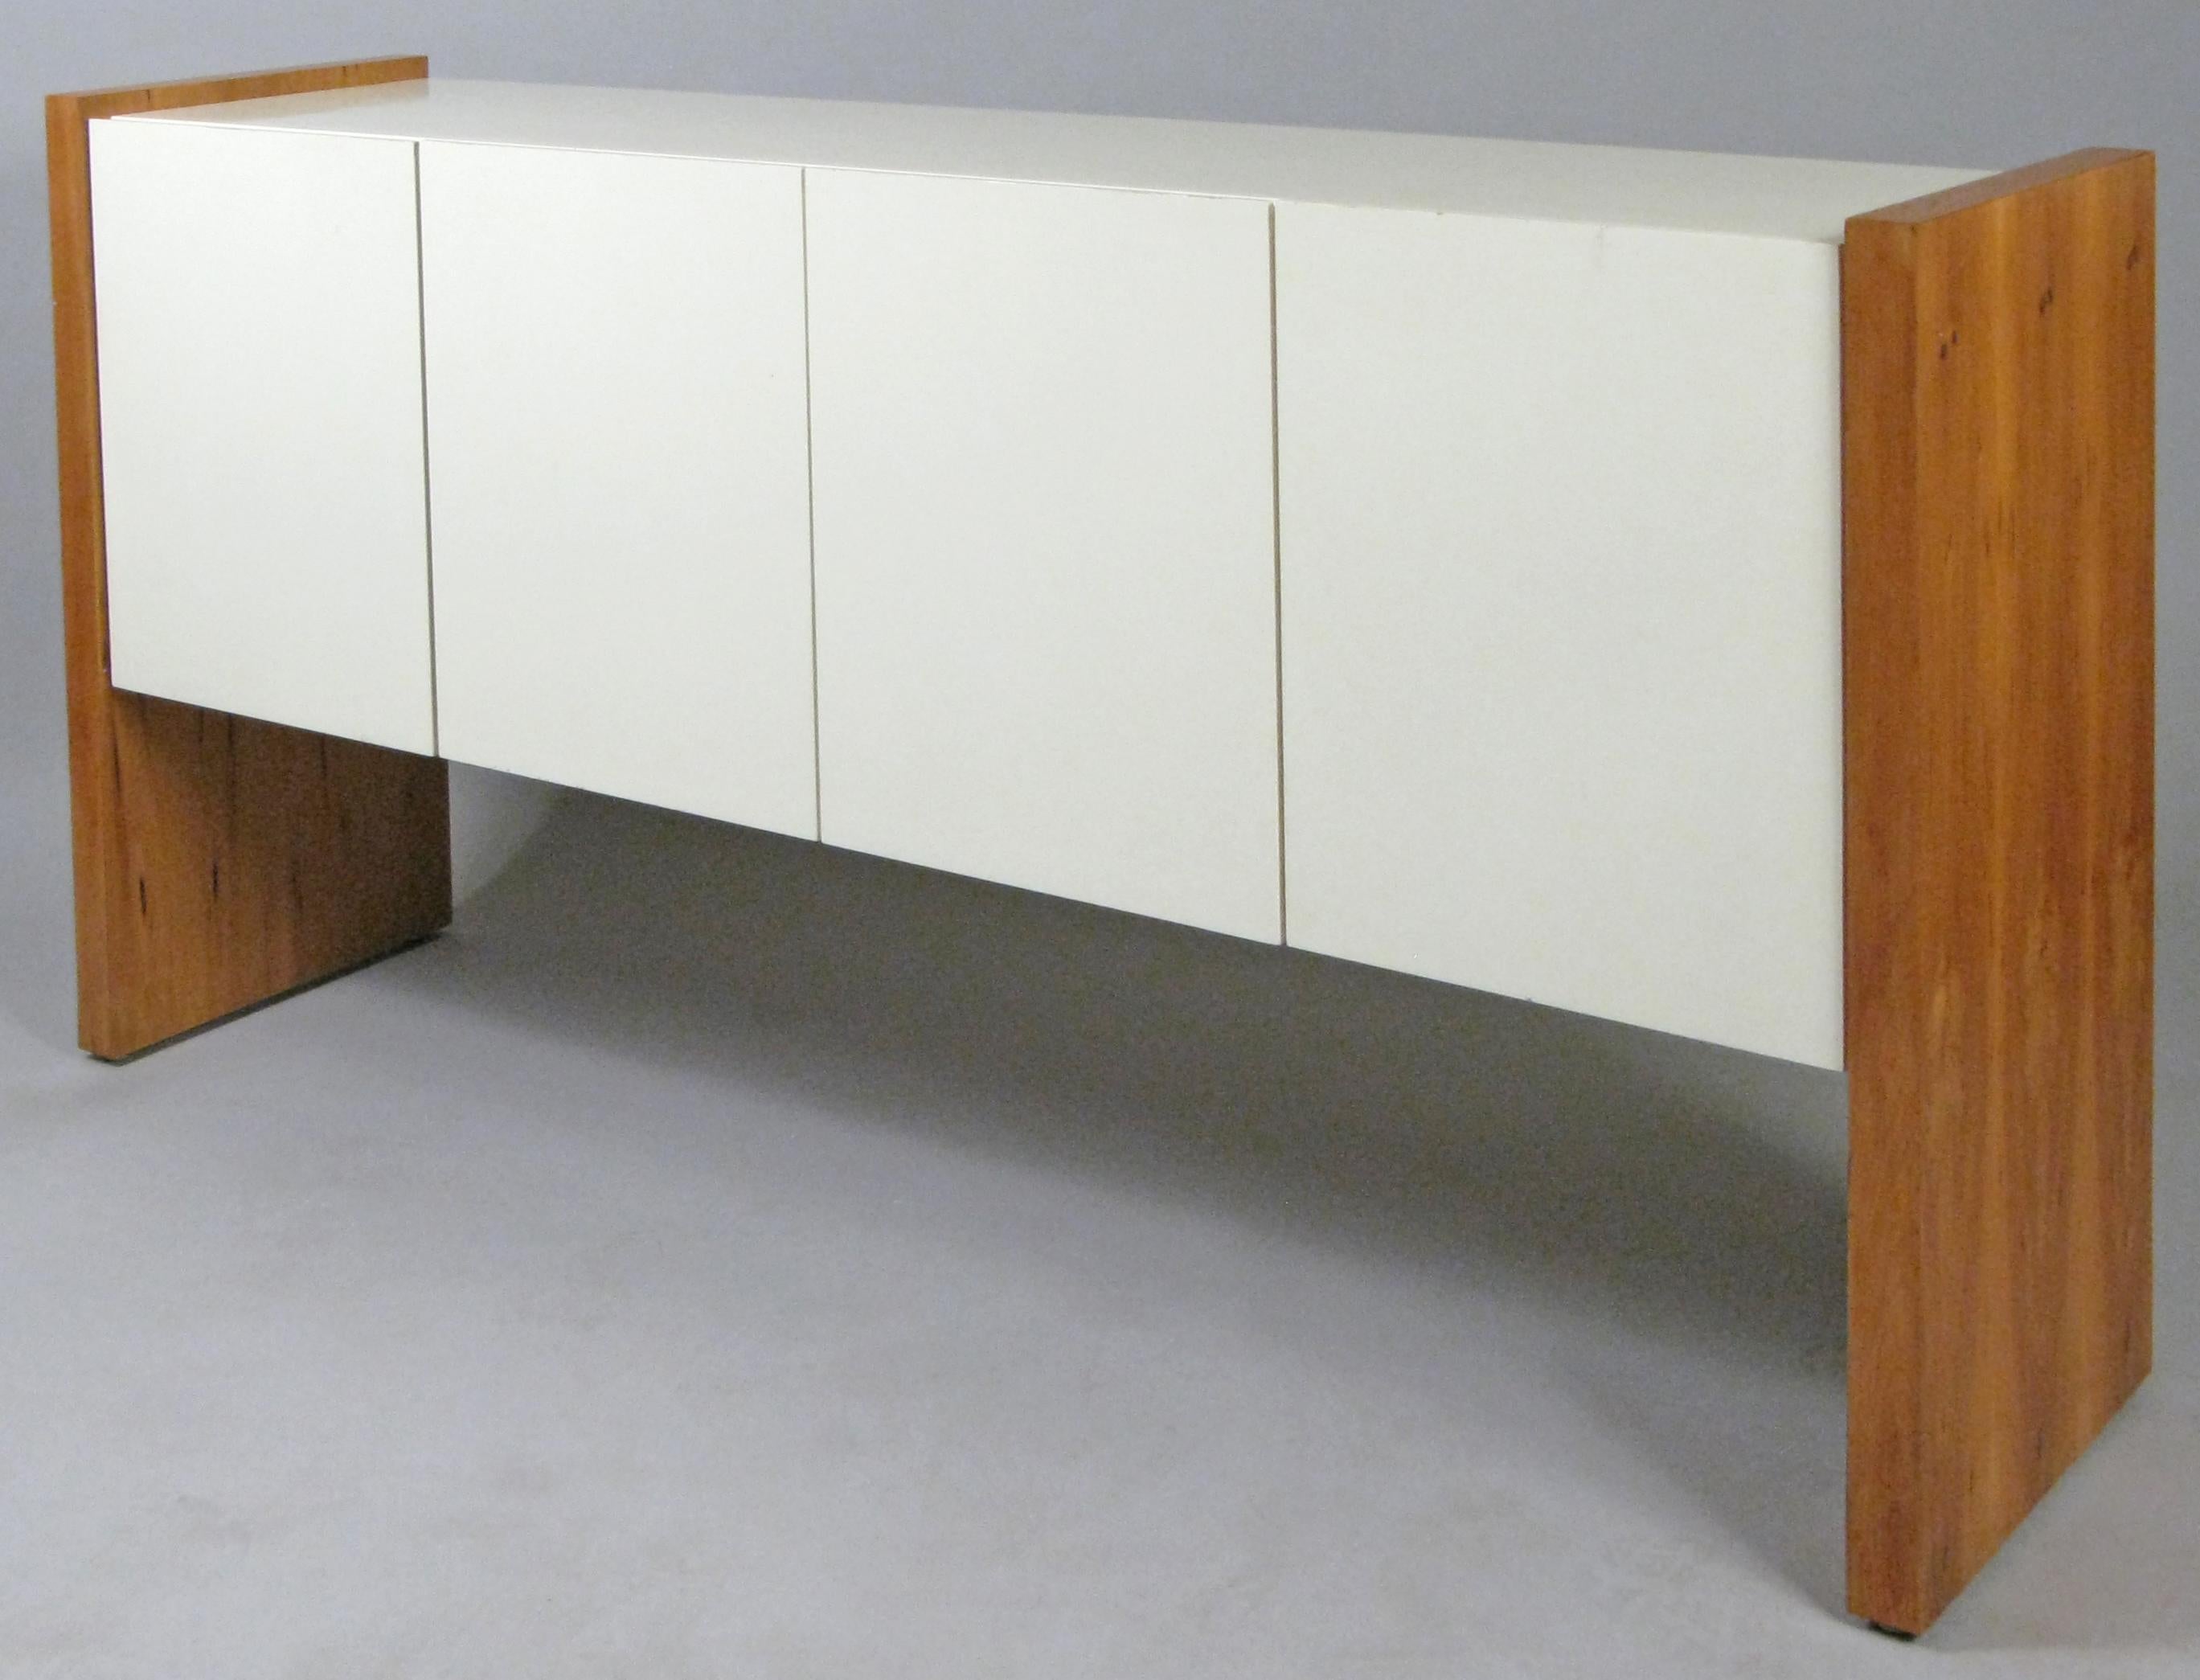 A very handsome and iconic 1960s cabinet designed by Milo Baughman for Thayer Coggin. designed with an ivory lacquered cabinet 'floating' between the two walnut bases. the cabinet has two pairs of hinged doors, the left one for an adjustable shelf